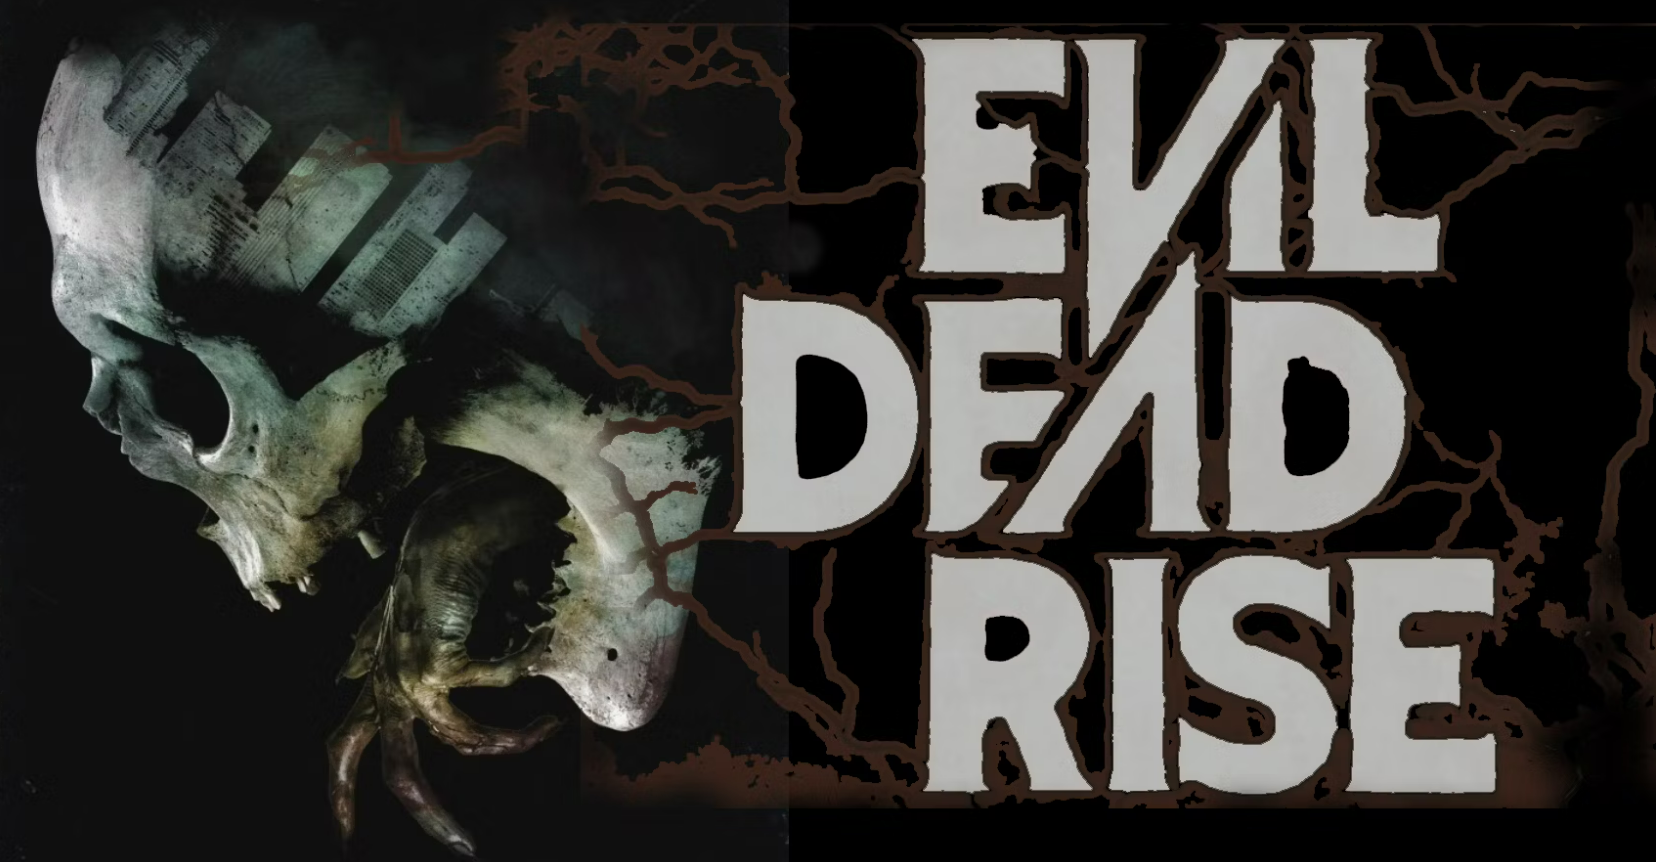 When will Evil Dead Rise be on HBO Max? When Will the Movie Be